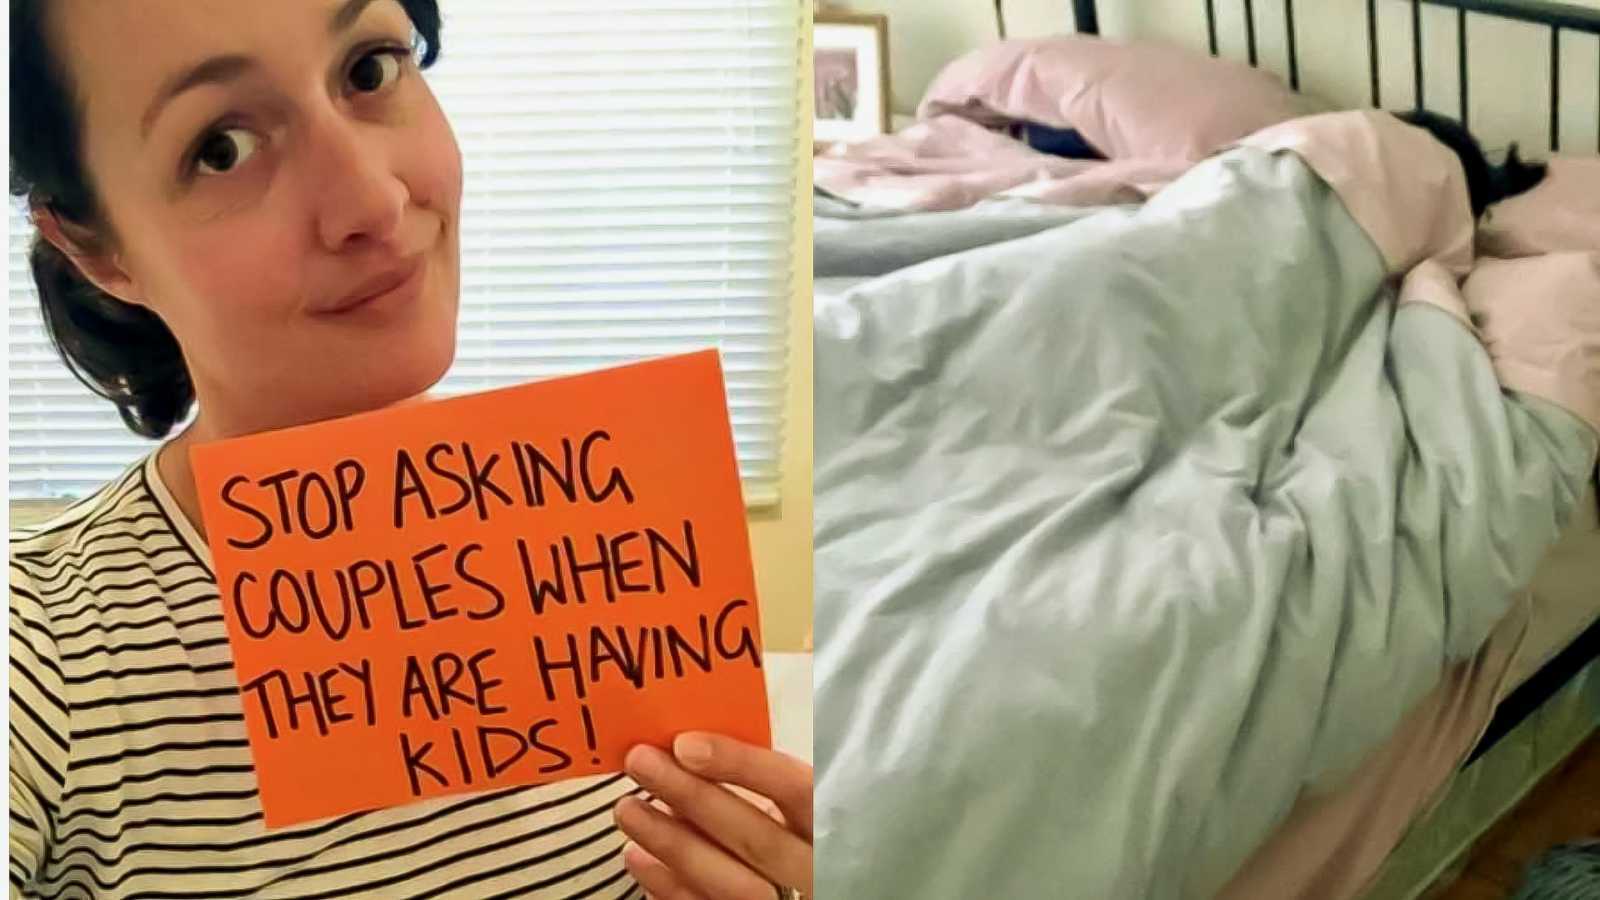 woman struggling with infertility holds PSA sign and lies in bed